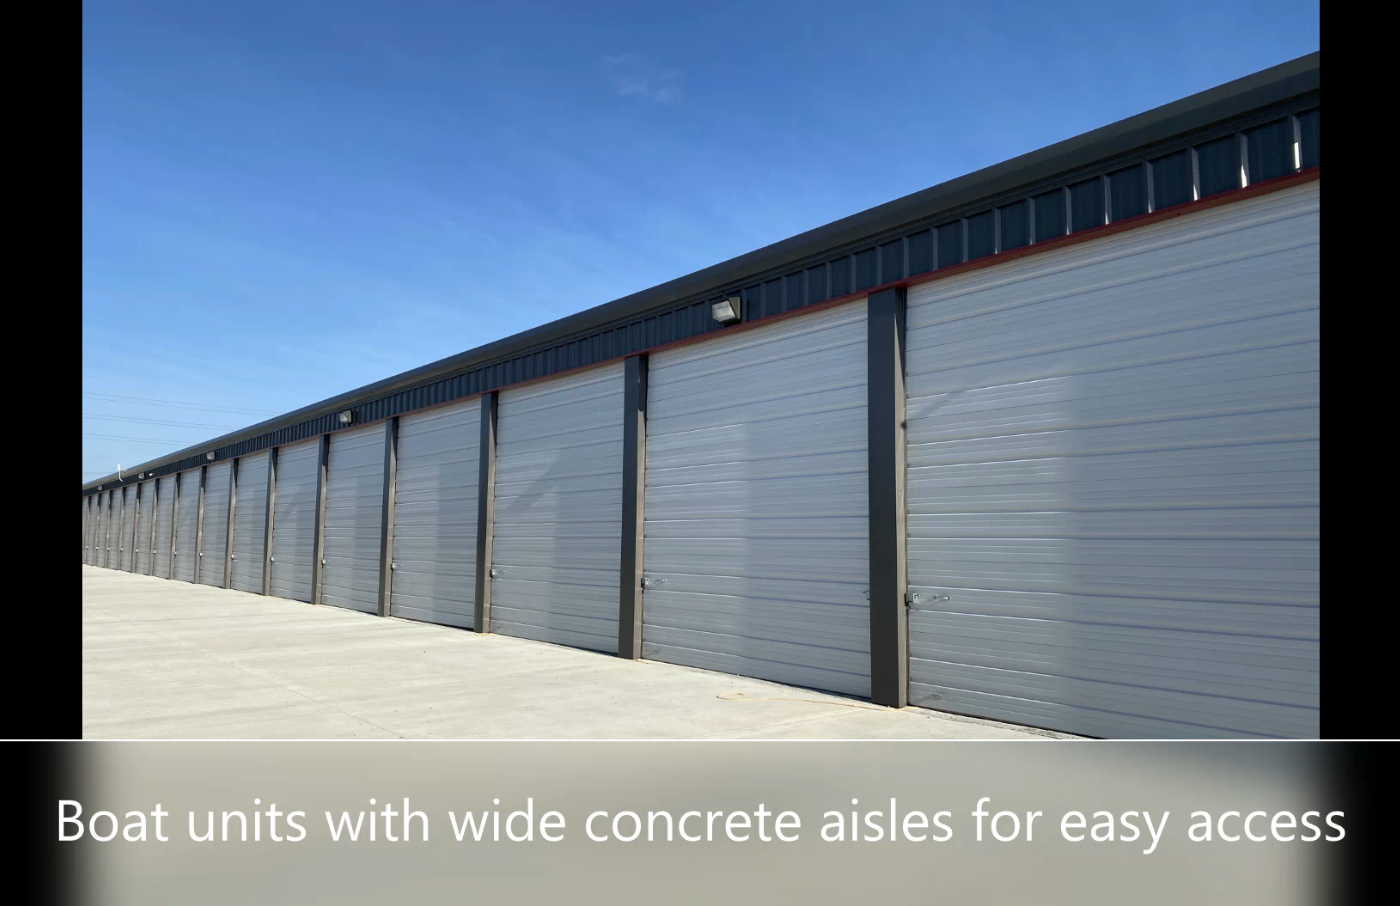 Boat units with wide concrete aisles for easy access